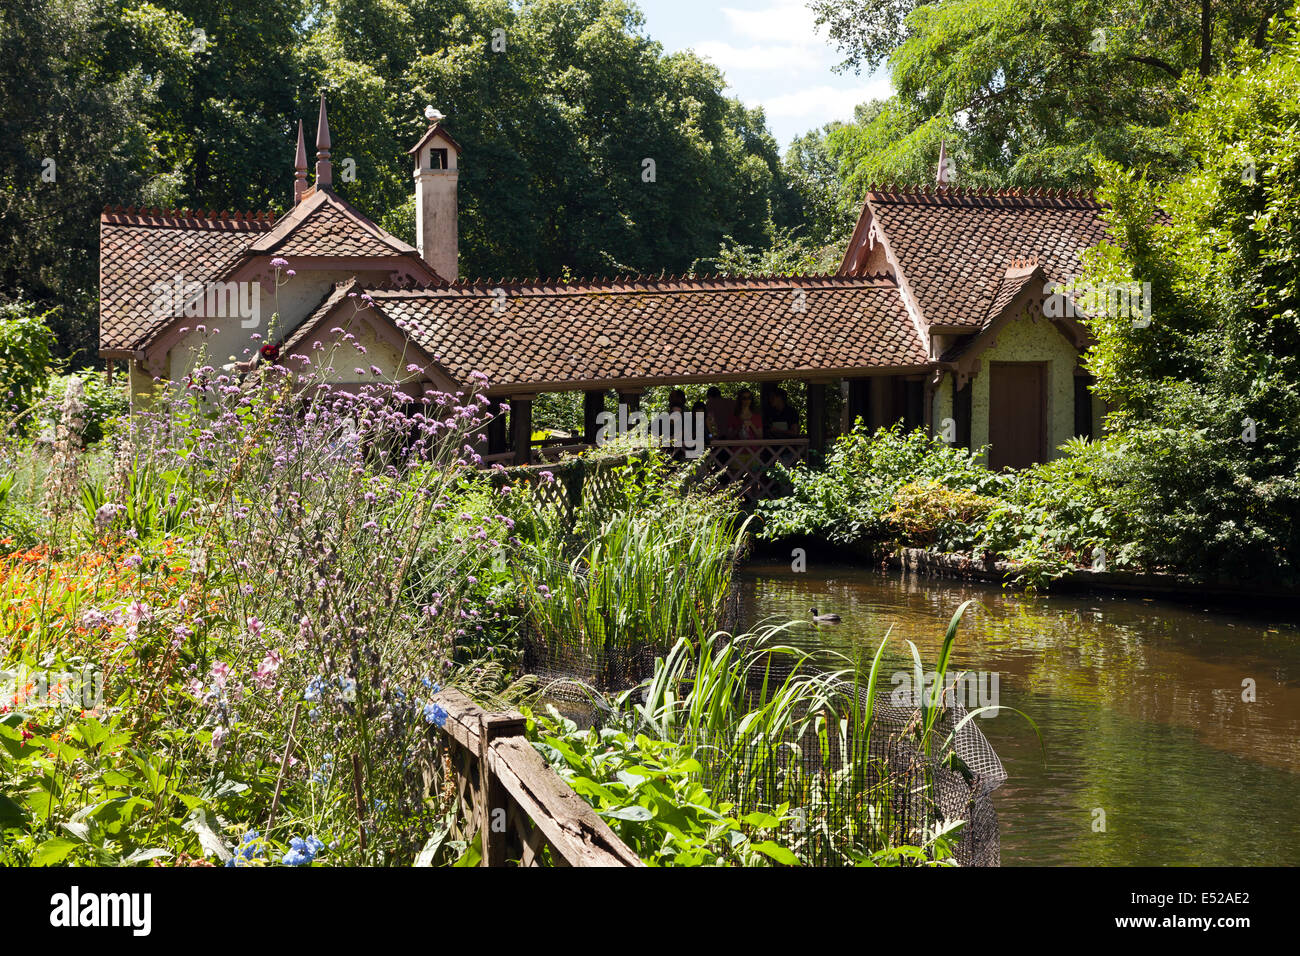 A view of Duck Island Cottage and Garden, St James's Park, London. Stock Photo